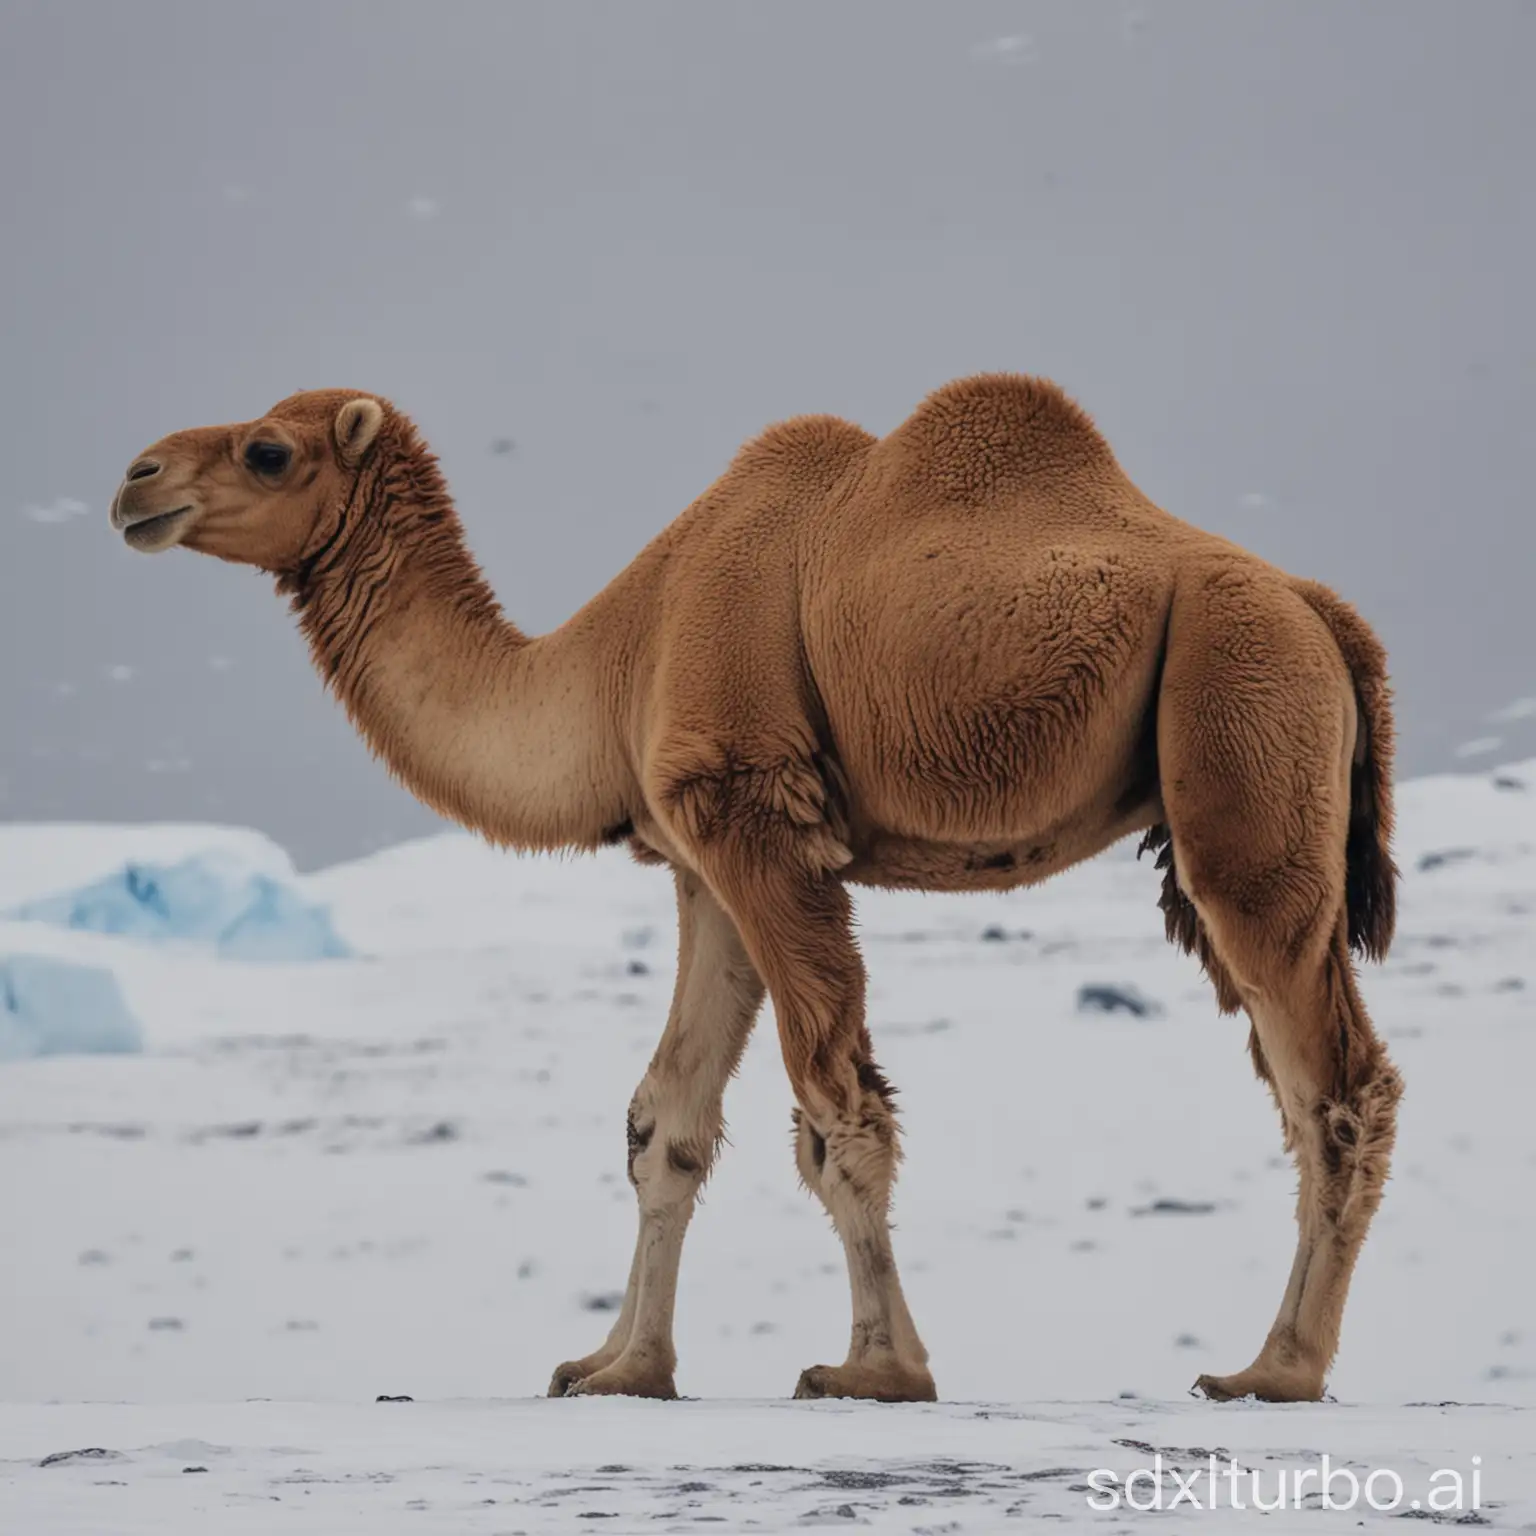 Camel-in-Antarctica-Unlikely-Encounter-of-a-Desert-Dweller-in-the-Frozen-Tundra